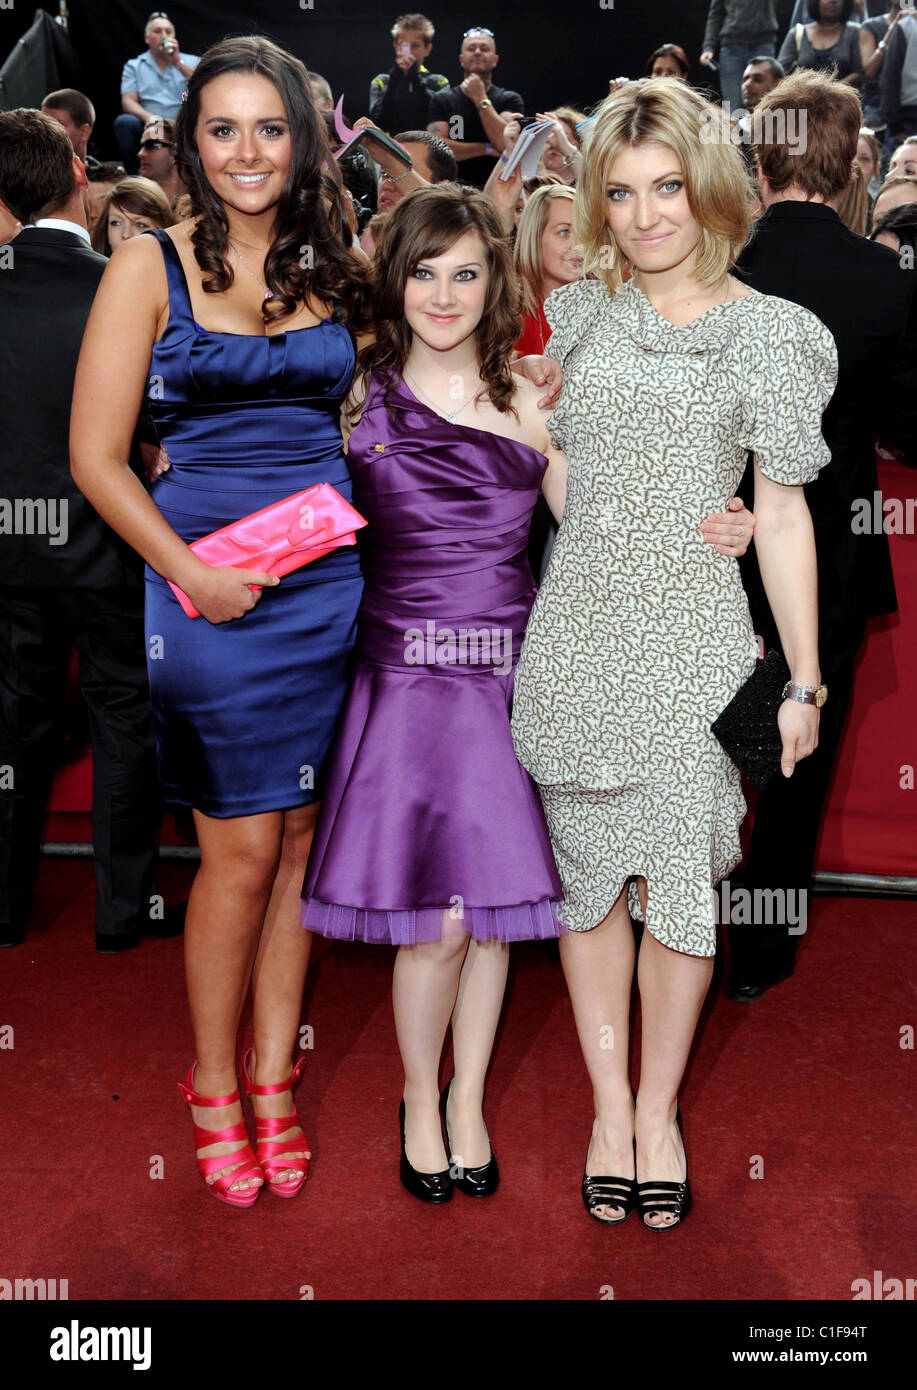 Jessica Heywood, Kelsey-Beth Crossley and Sally Oliver The British Soap Awards 2009 held at BBC Television Centre - Red Carpet Stock Photo